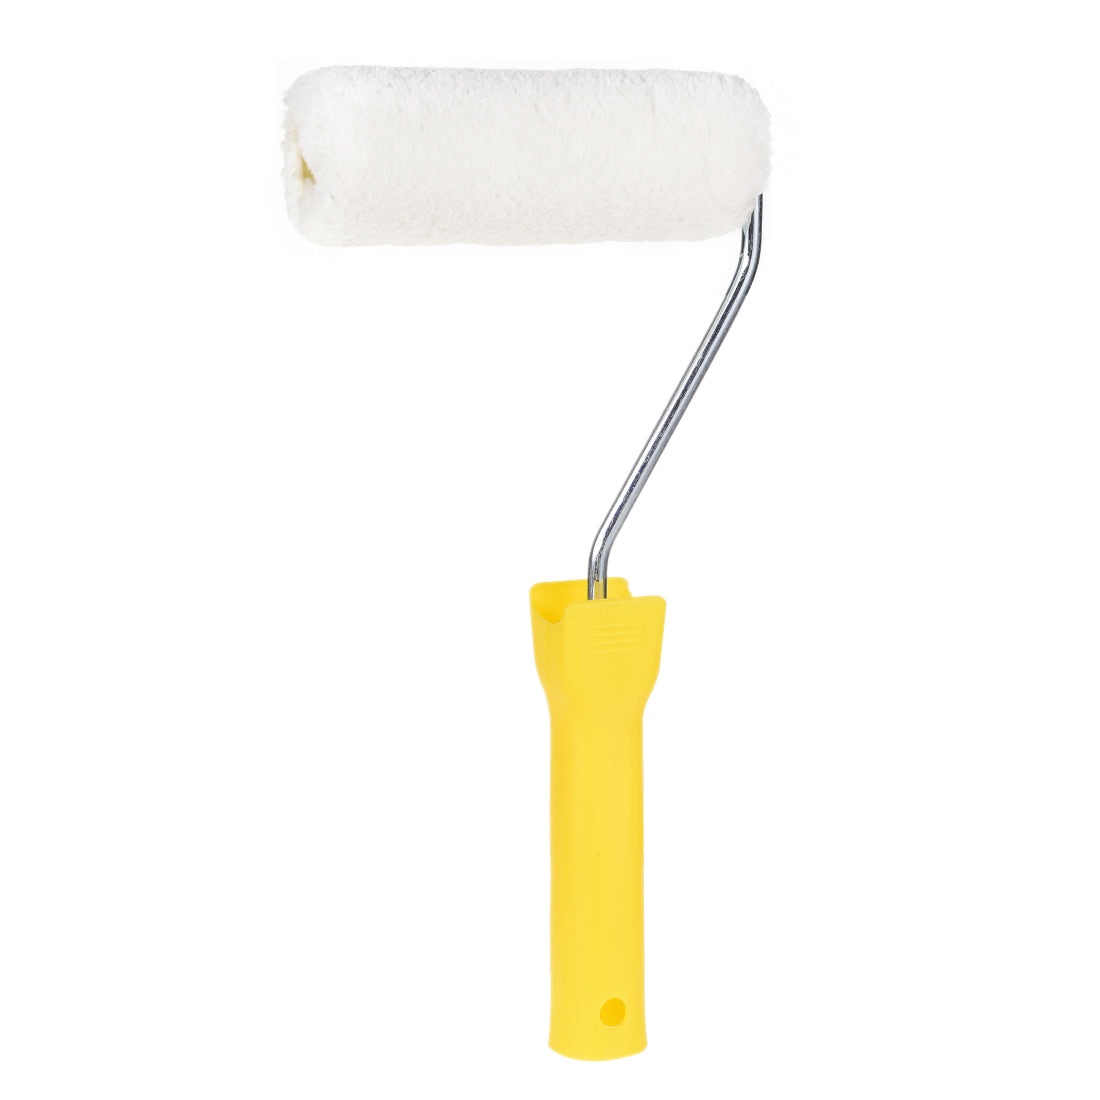 Uxcell Uxcell Paint Roller Brush 5 Inch 128mm for Household Wall Painting Treatment with Plastic Handle